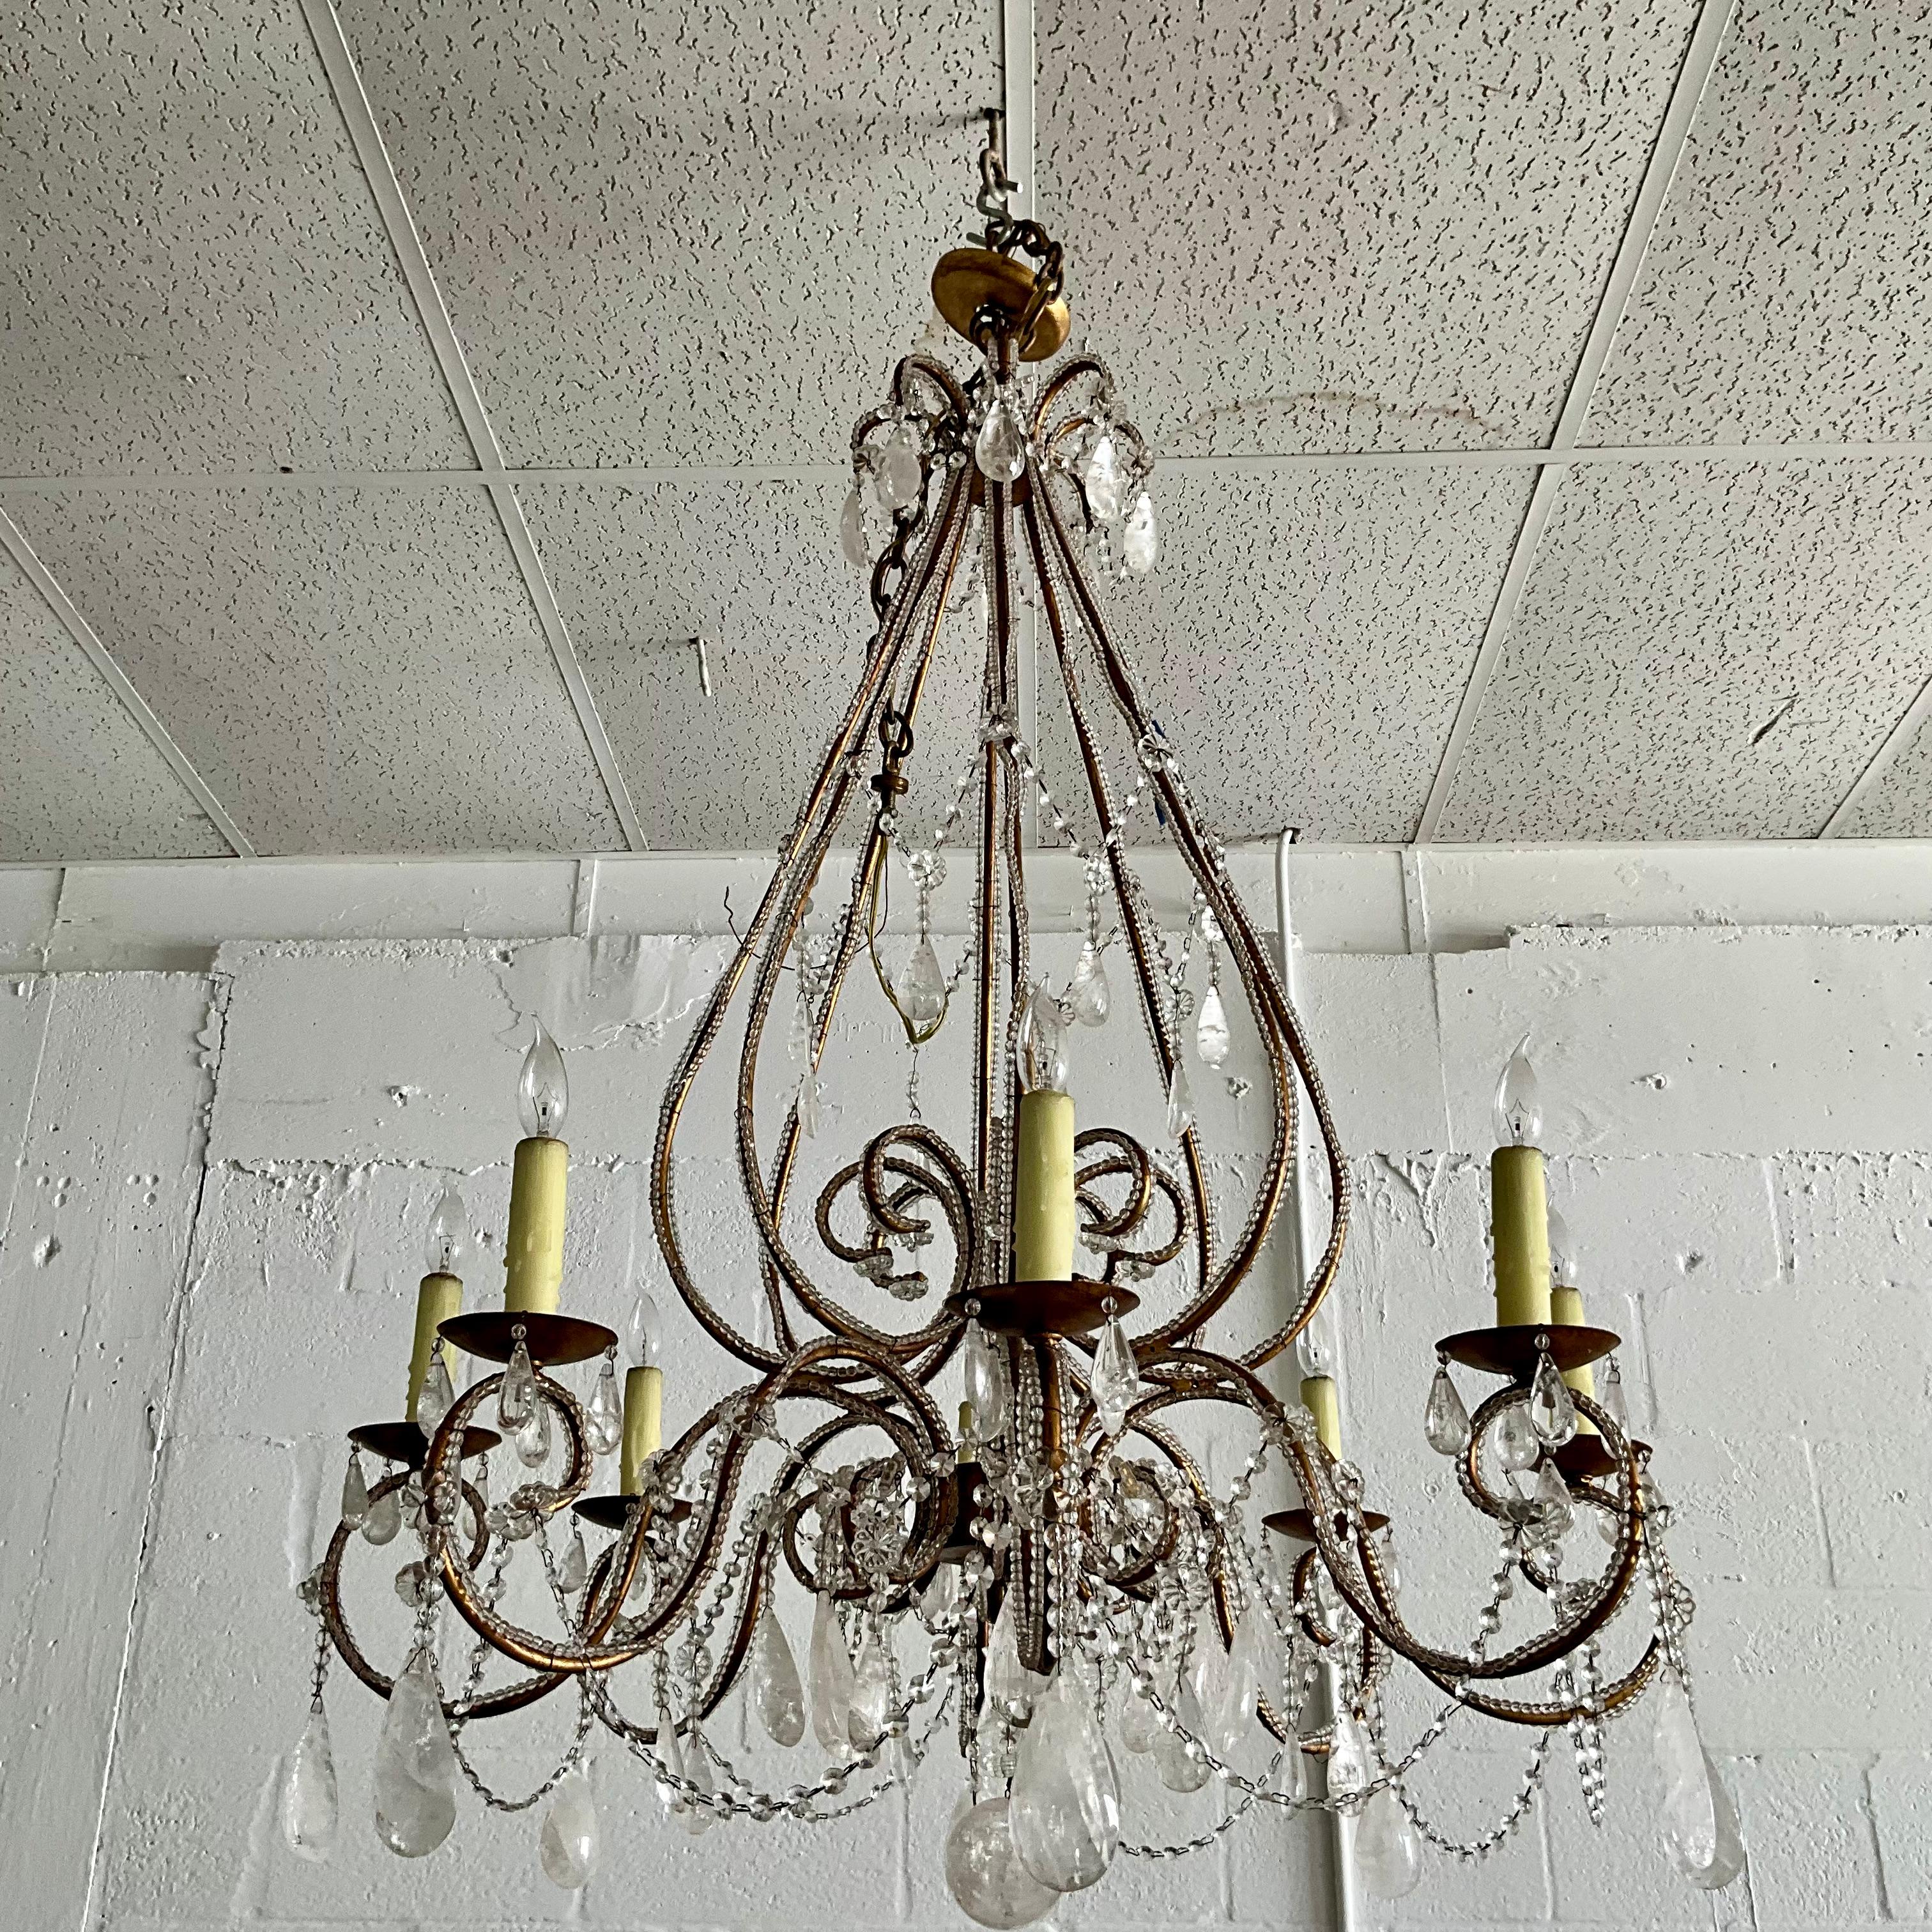 Rococo Revival Large 8 Arm Venetian Tole and Rock Crystal Chandelier For Sale